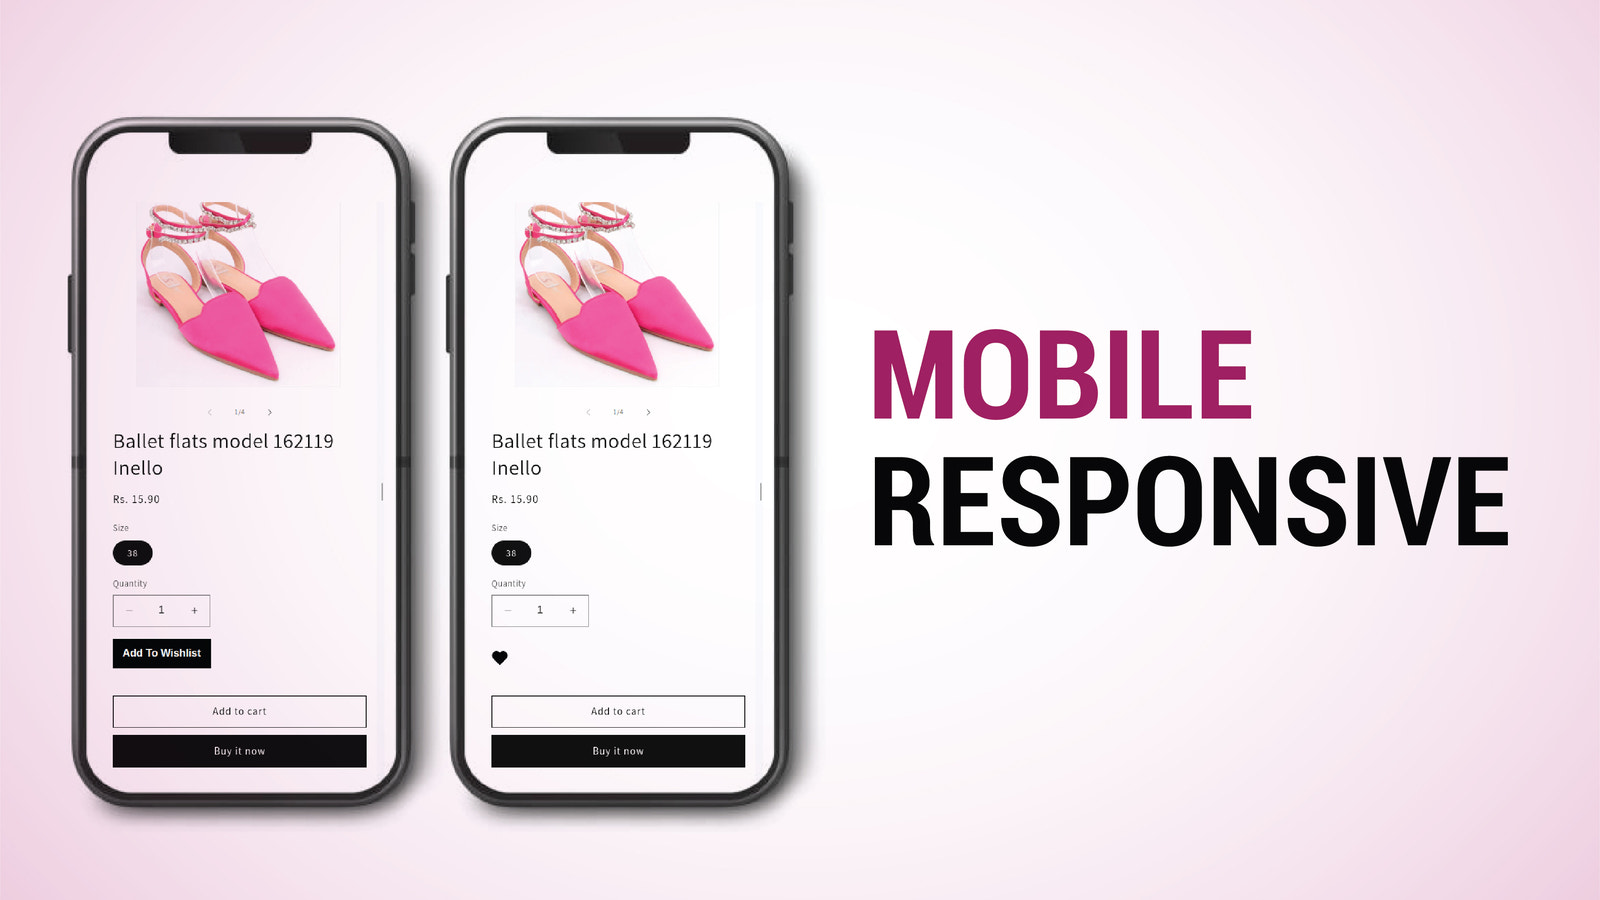 Responsive for mobiles